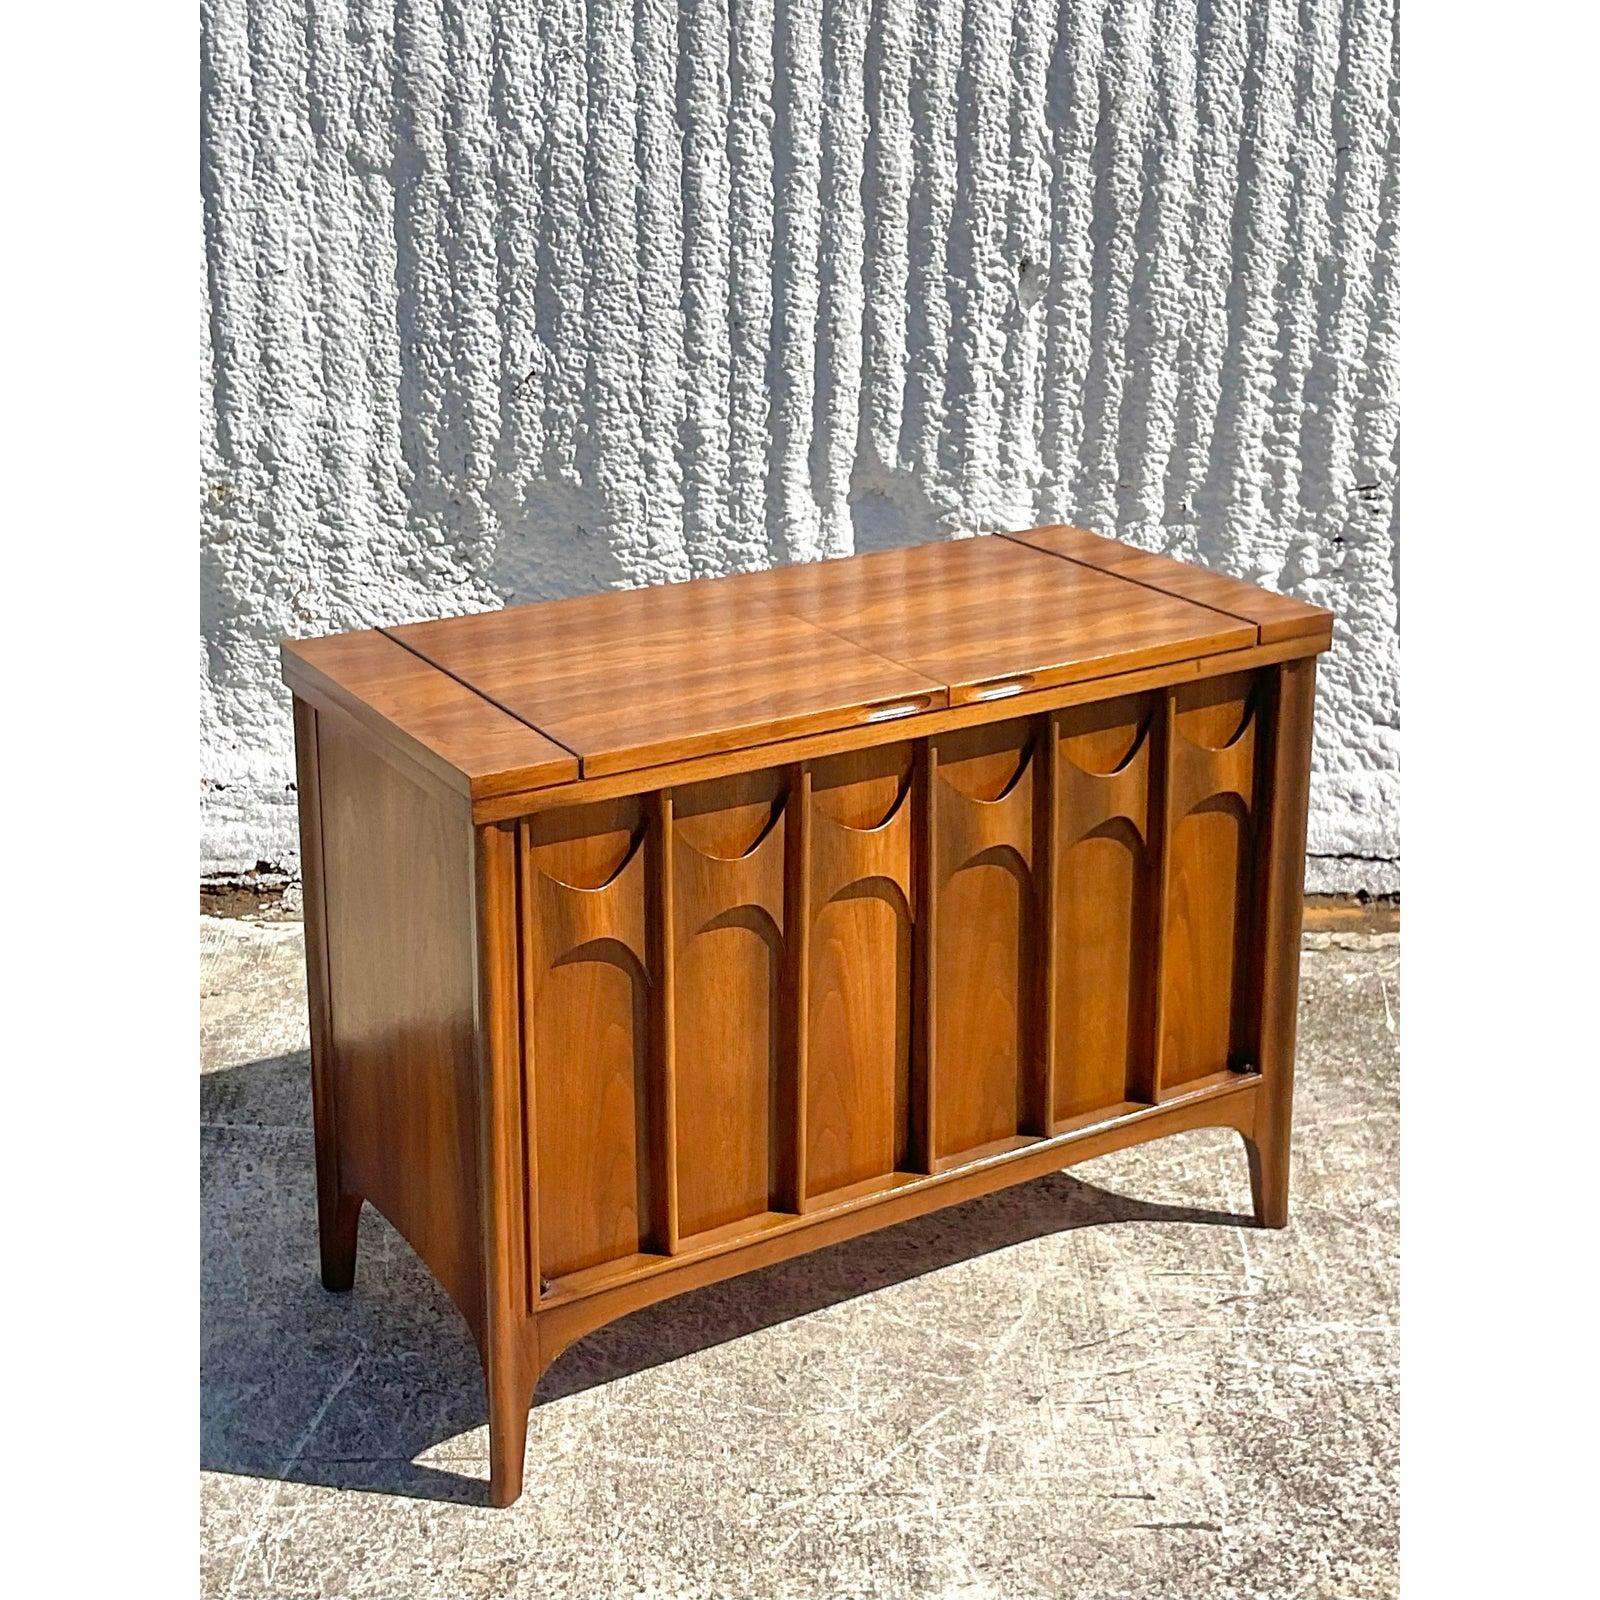 Fantastic Midcentury Kent Coffey sideboard. One of the pieces of the iconic Perspecta collection. Beautiful flip top opens to reveal lots of great additional surface space for entertaining. Perfect as a sideboard or even a dry bar. A real stylish